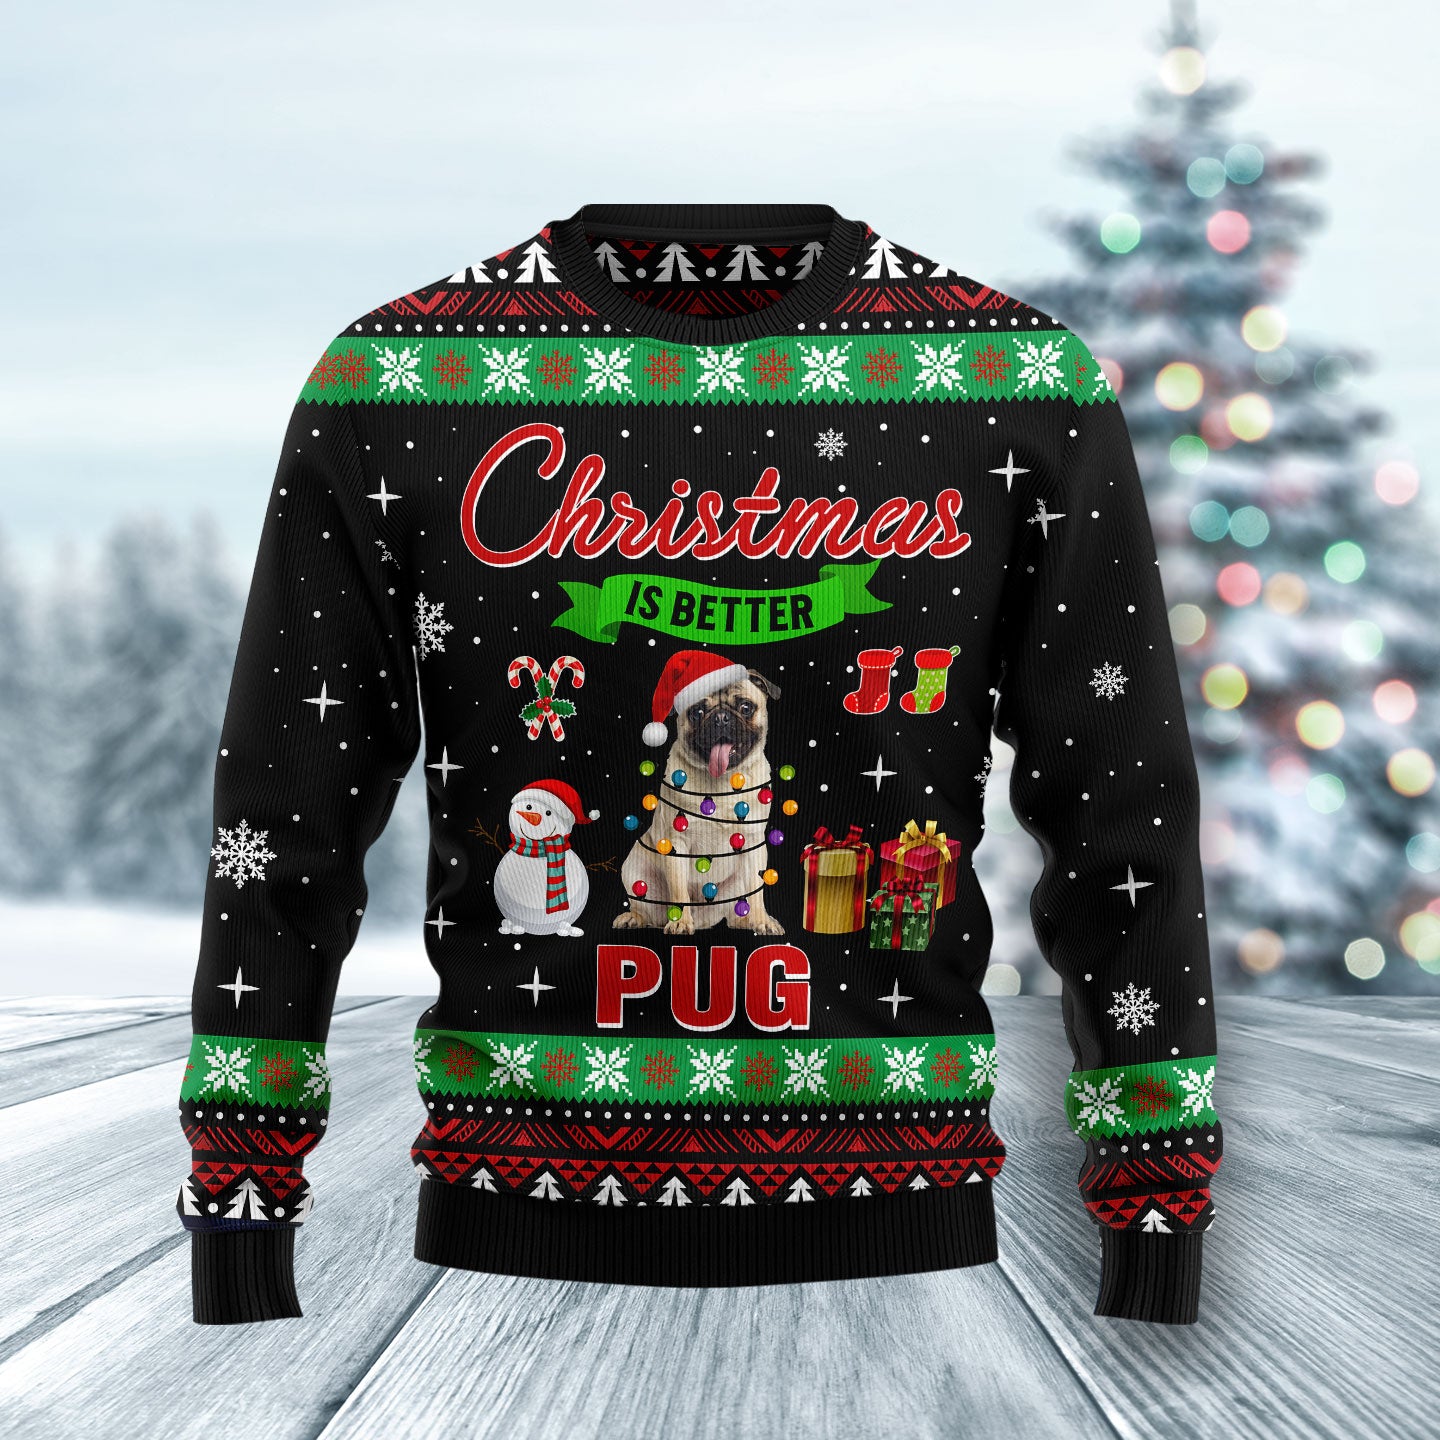 Christmas is better with Pug HT061124 Ugly Christmas Sweater